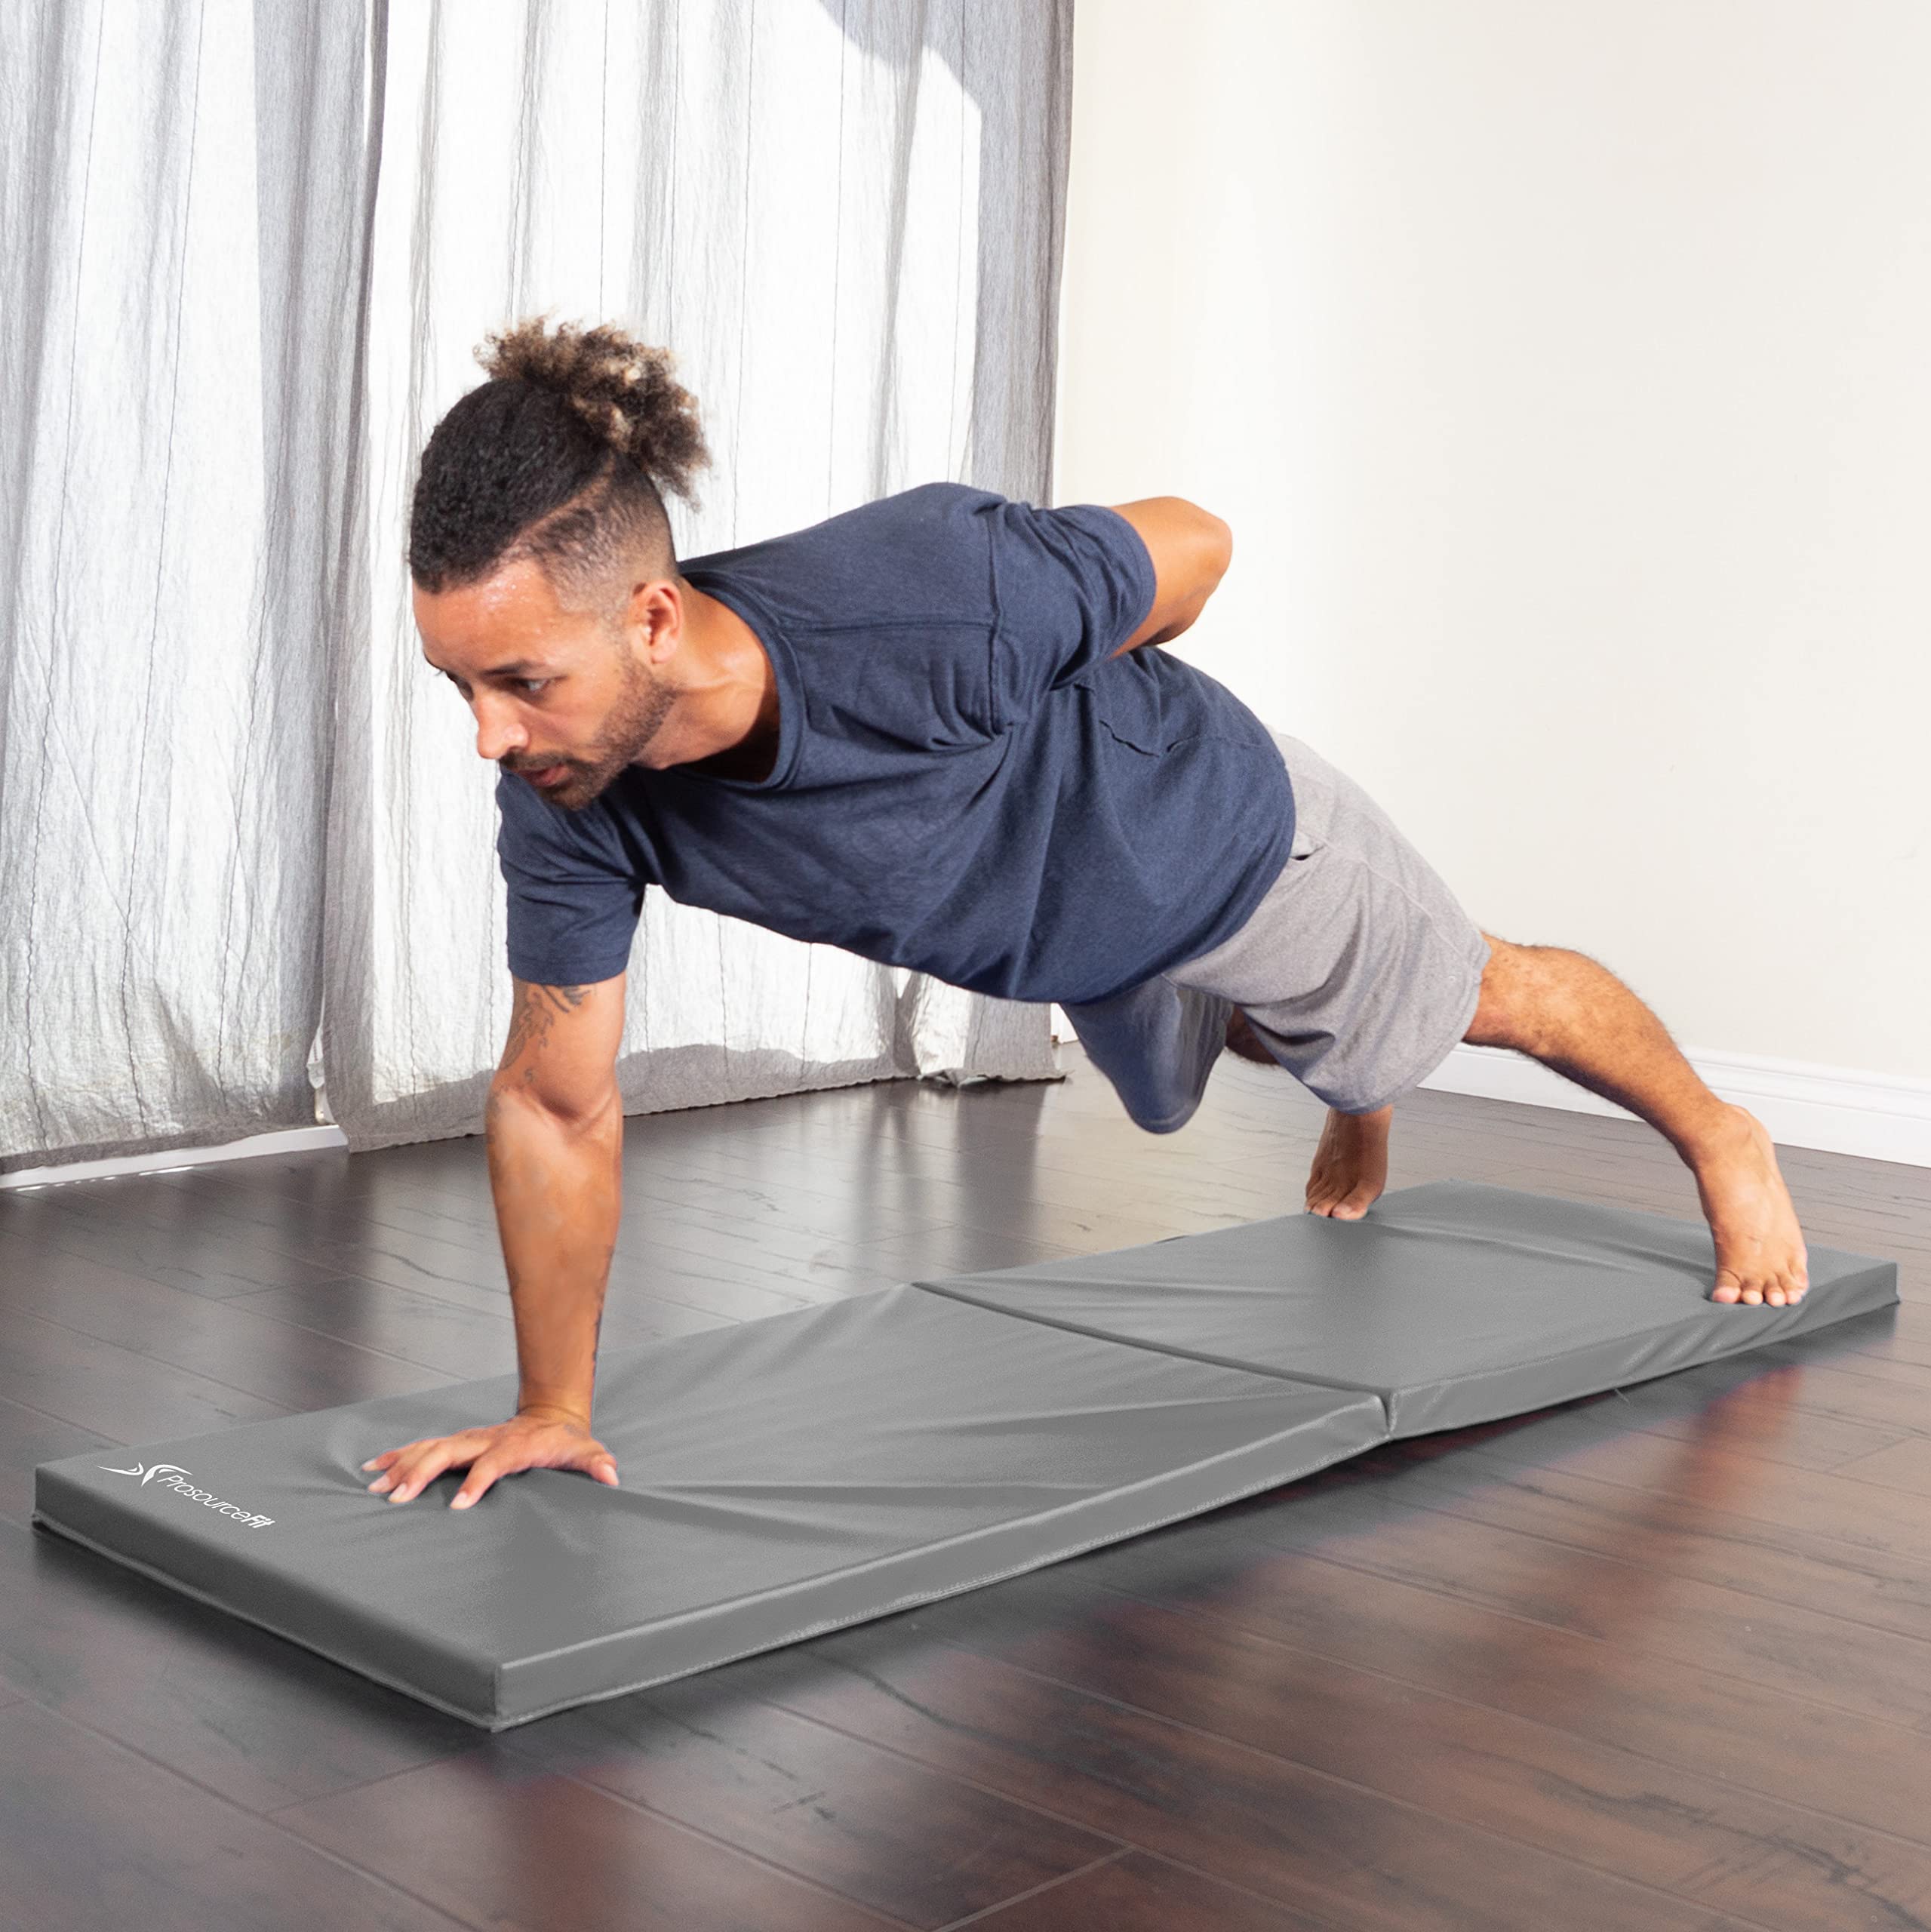 ProsourceFit Bi-Fold Folding Thick Exercise Mat 6’x2’ with Carrying Handles for MMA, Gymnastics, Stretching, Core Workouts